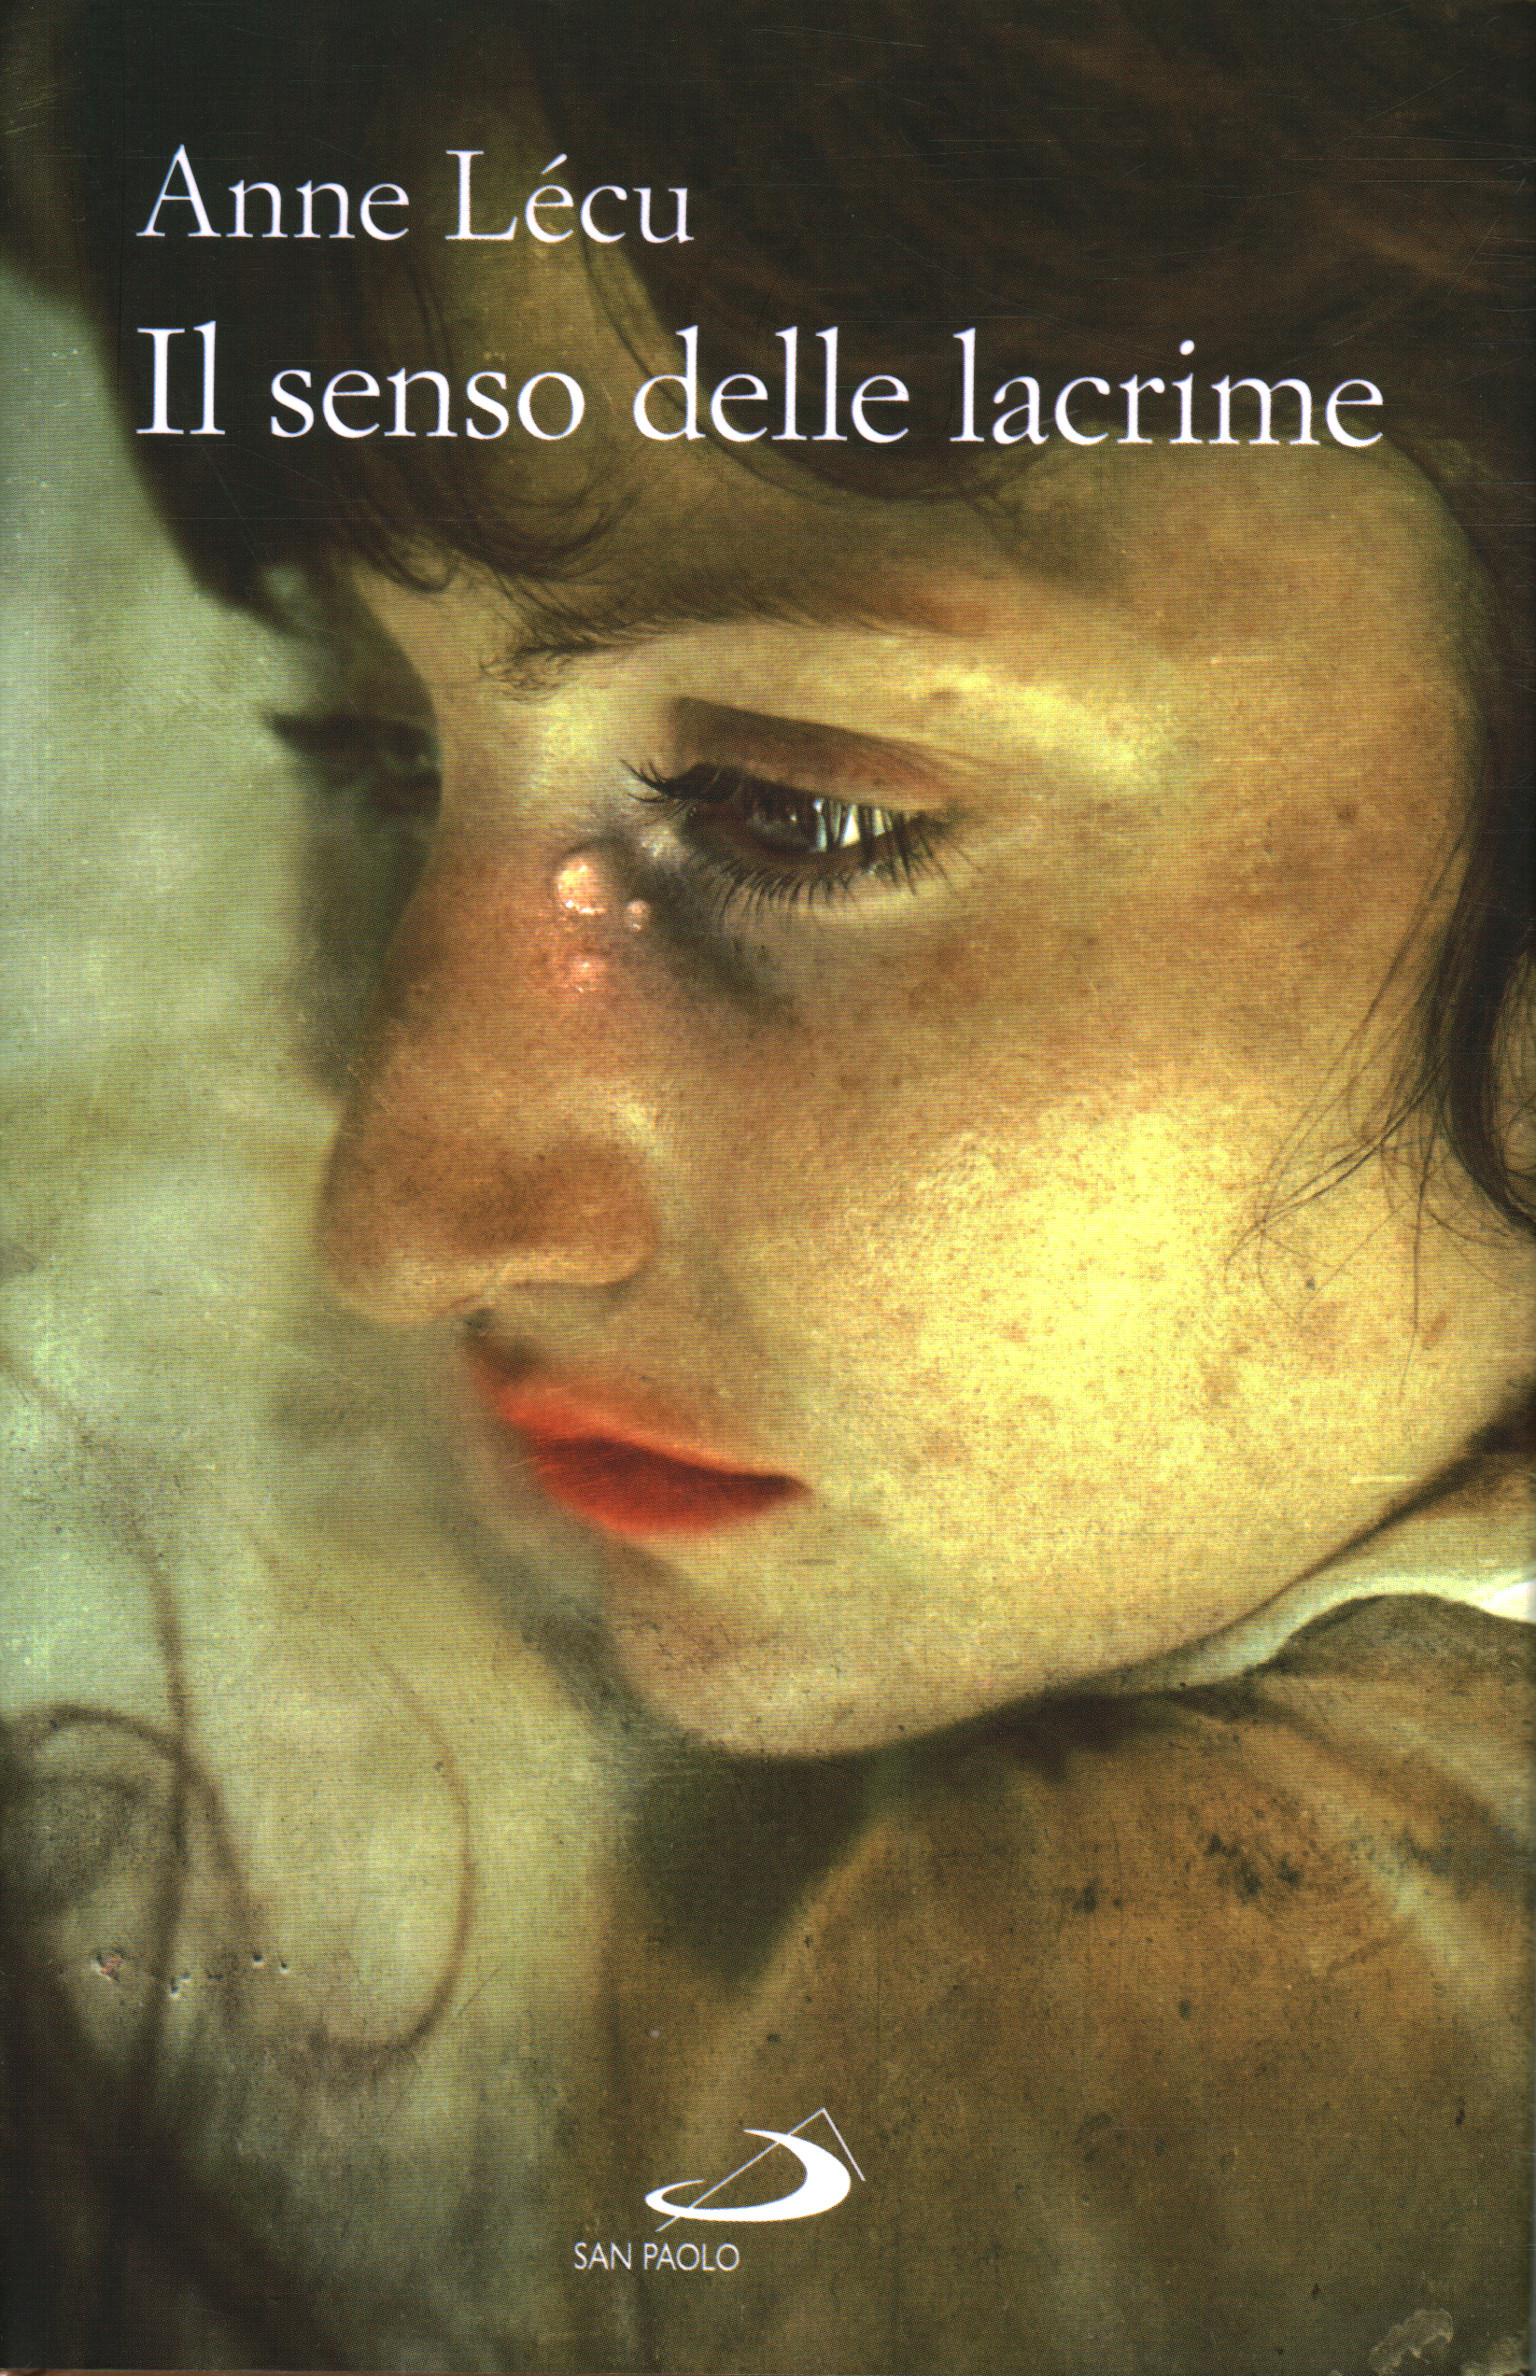 The meaning of tears, Anne Lécu